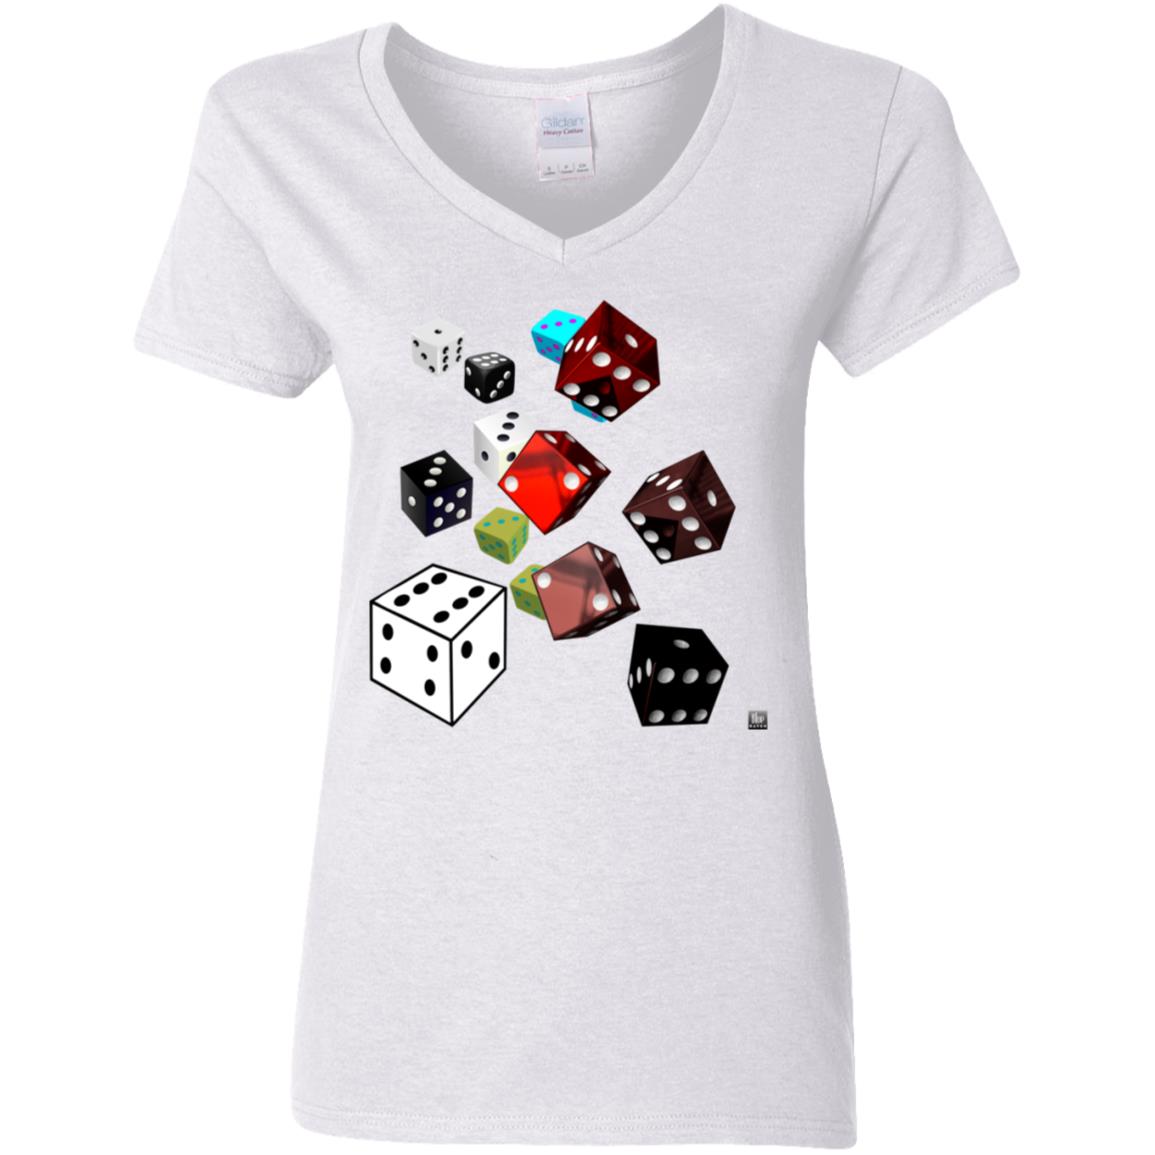 Roll Of The Dice - Women's V-Neck T Shirt